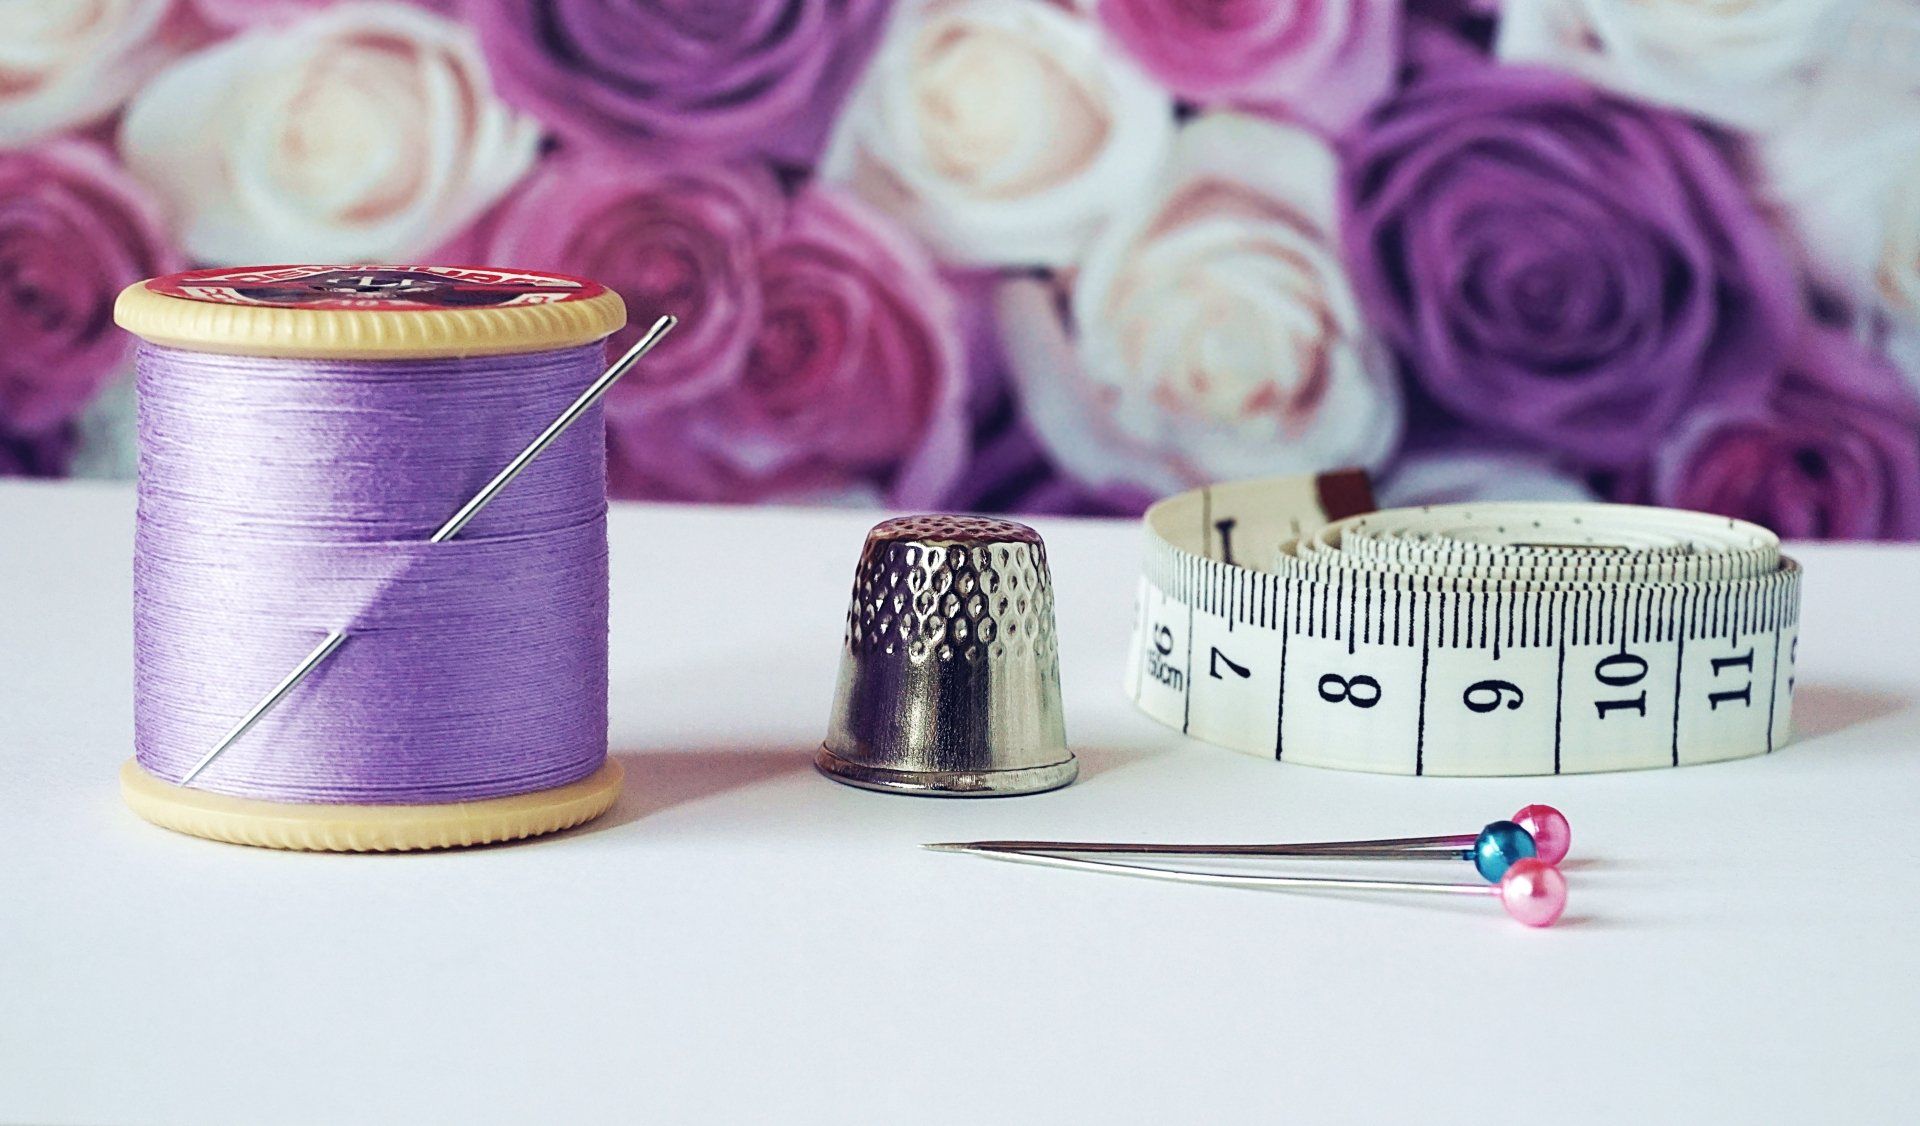 thread, thimble, pin, and tape measure with purple pink and white flowers for Community Open Sew events at Rachel Ann Quilts